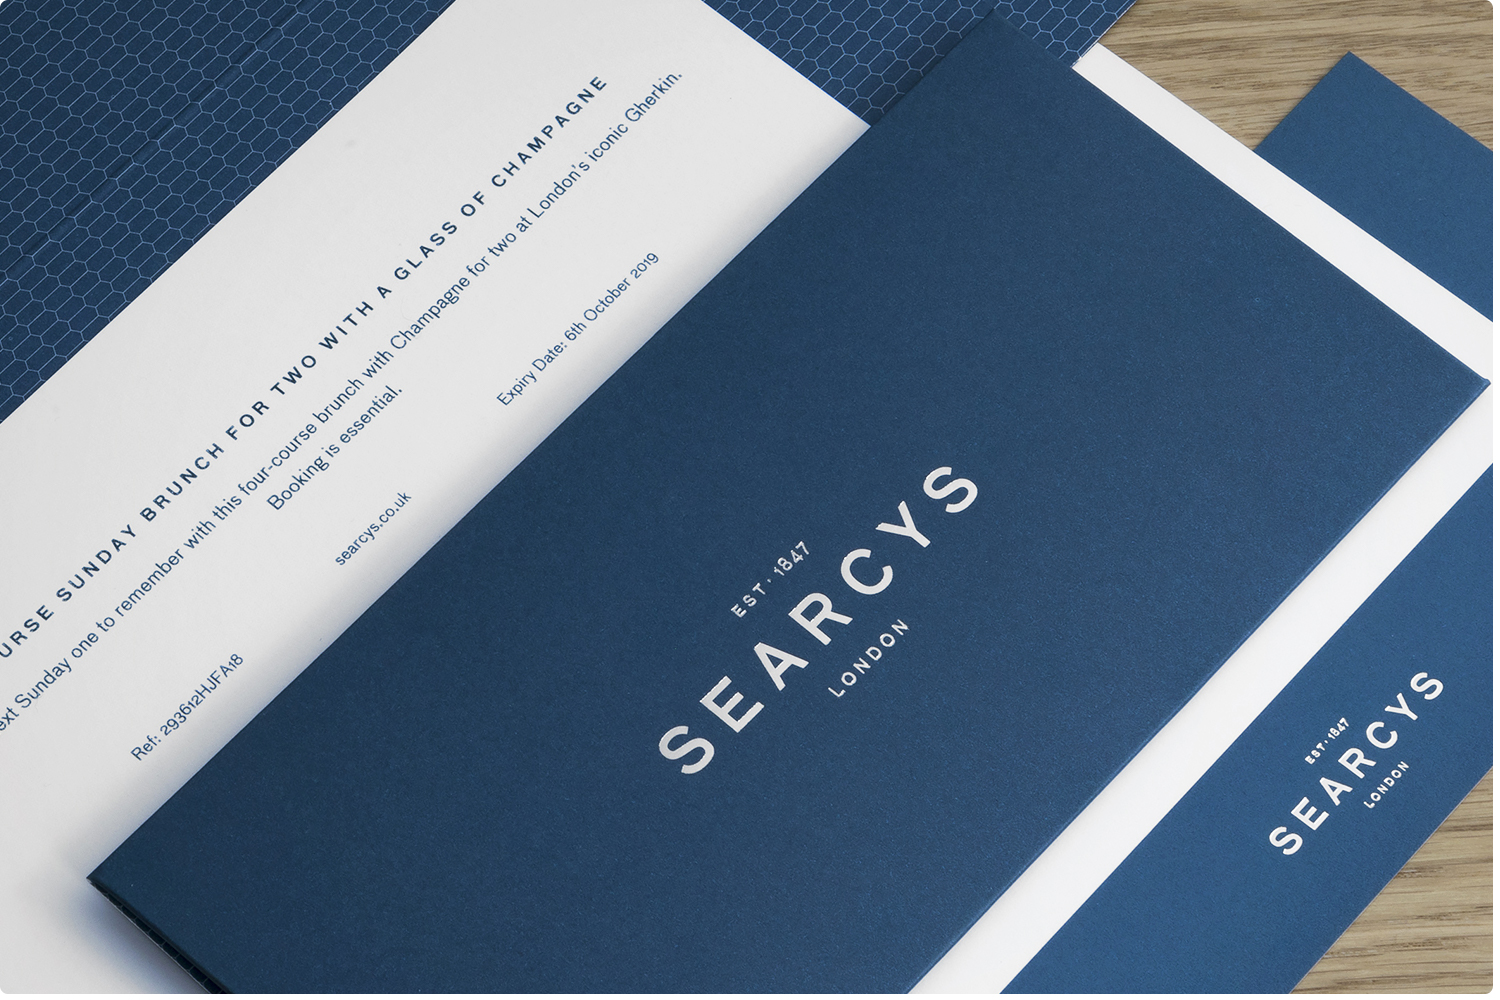 Searcys gift voucher packaging image